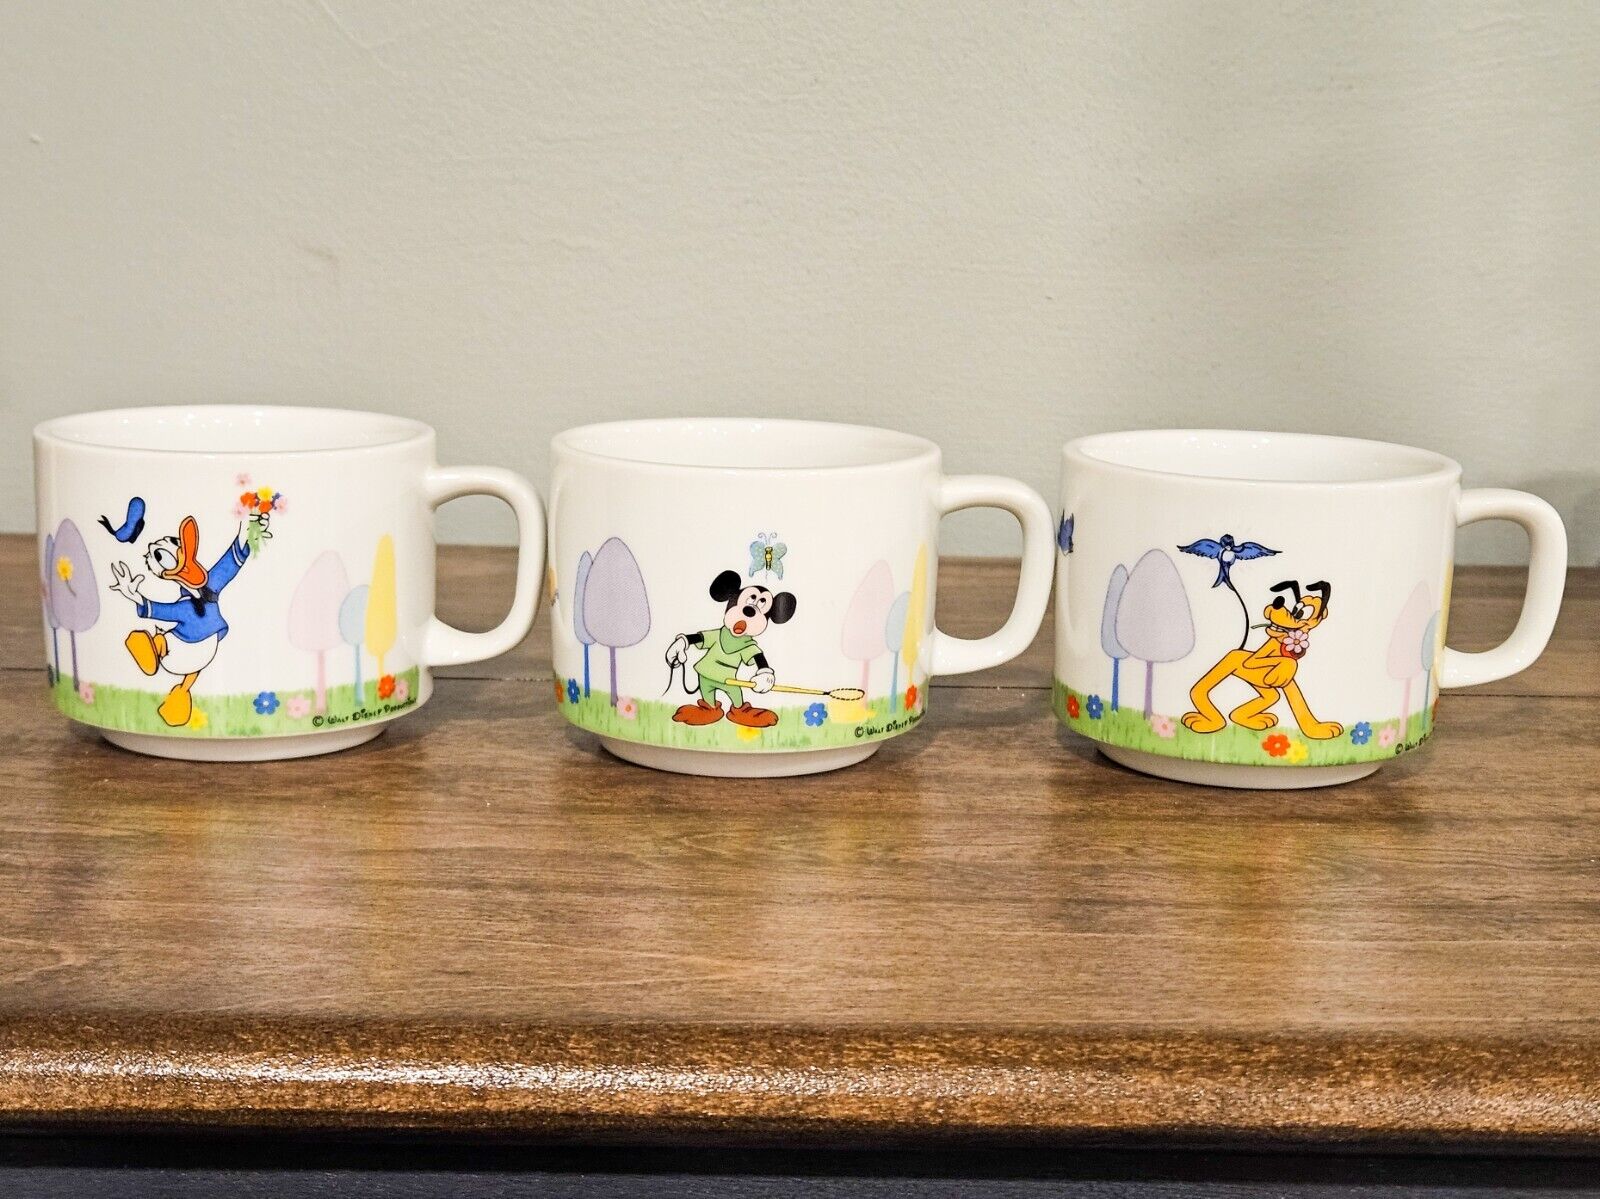 Vintage Disney Set of Spring Mugs Made in Japan- Mickey, Donald, and Pluto